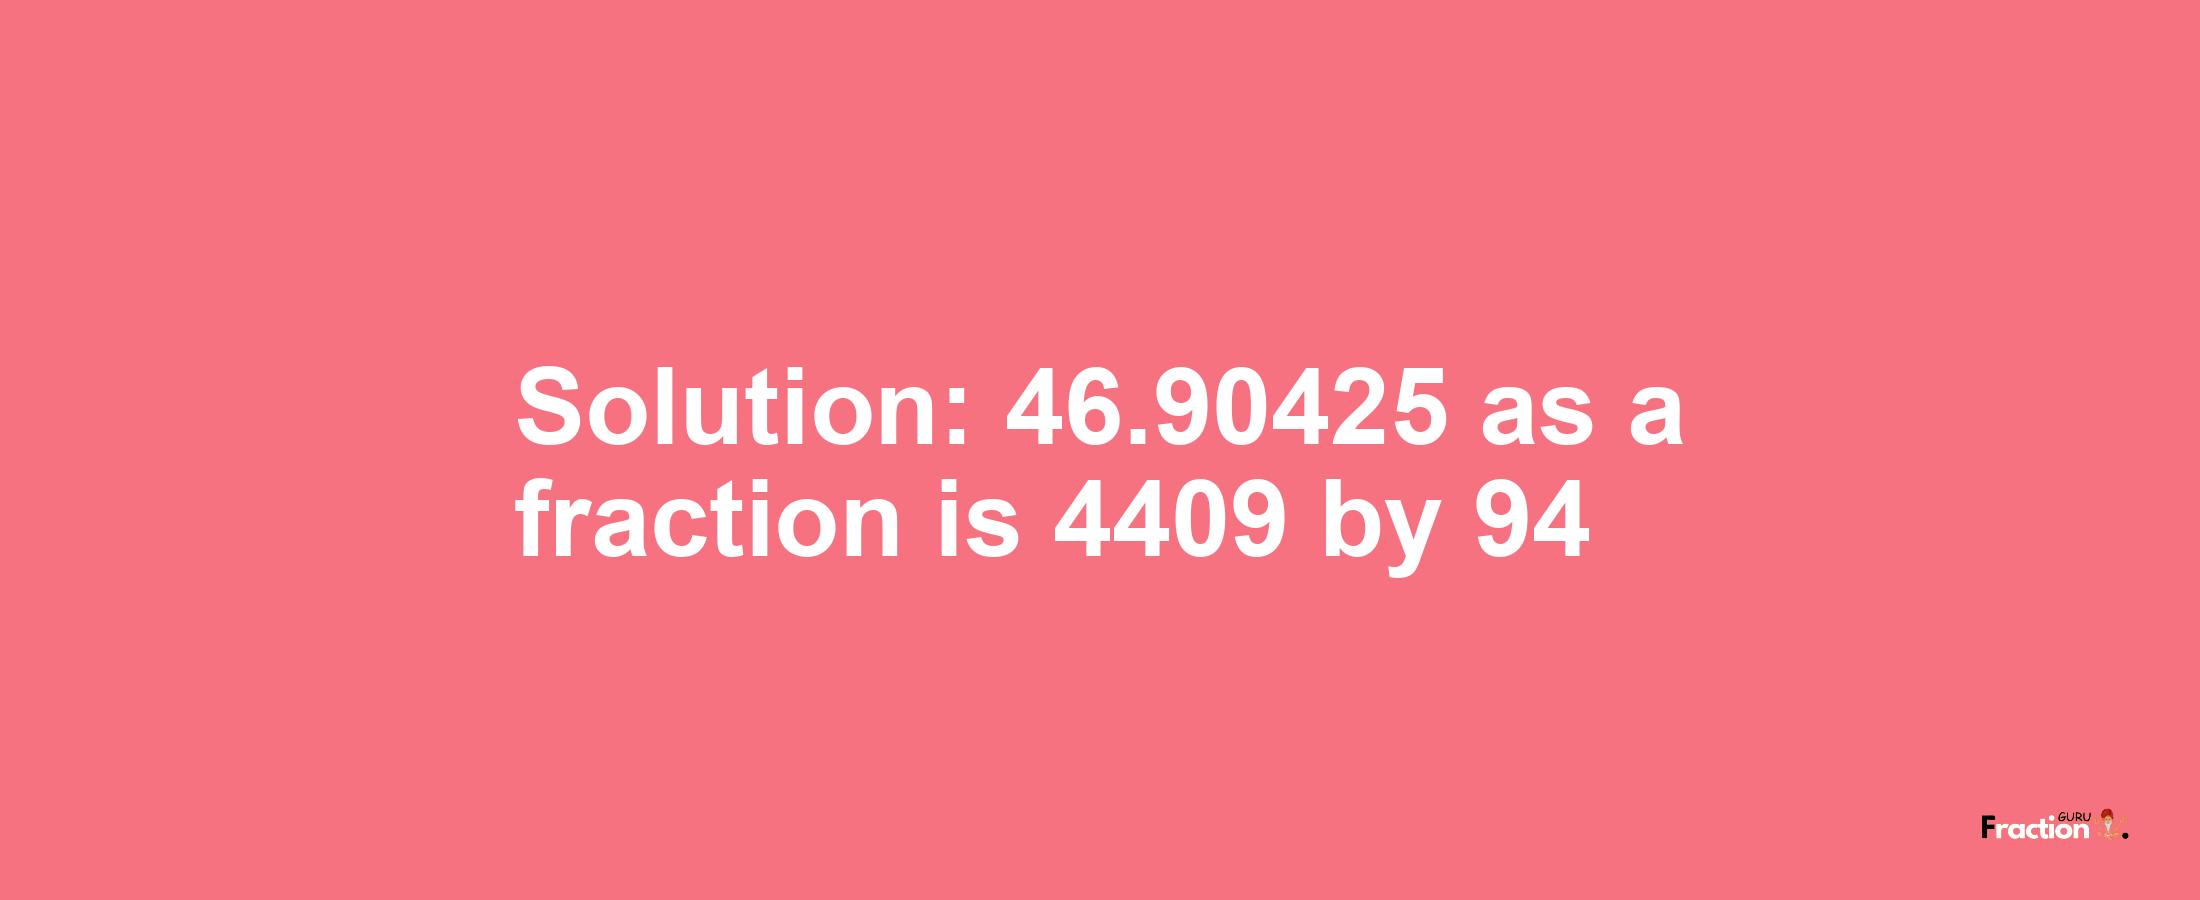 Solution:46.90425 as a fraction is 4409/94